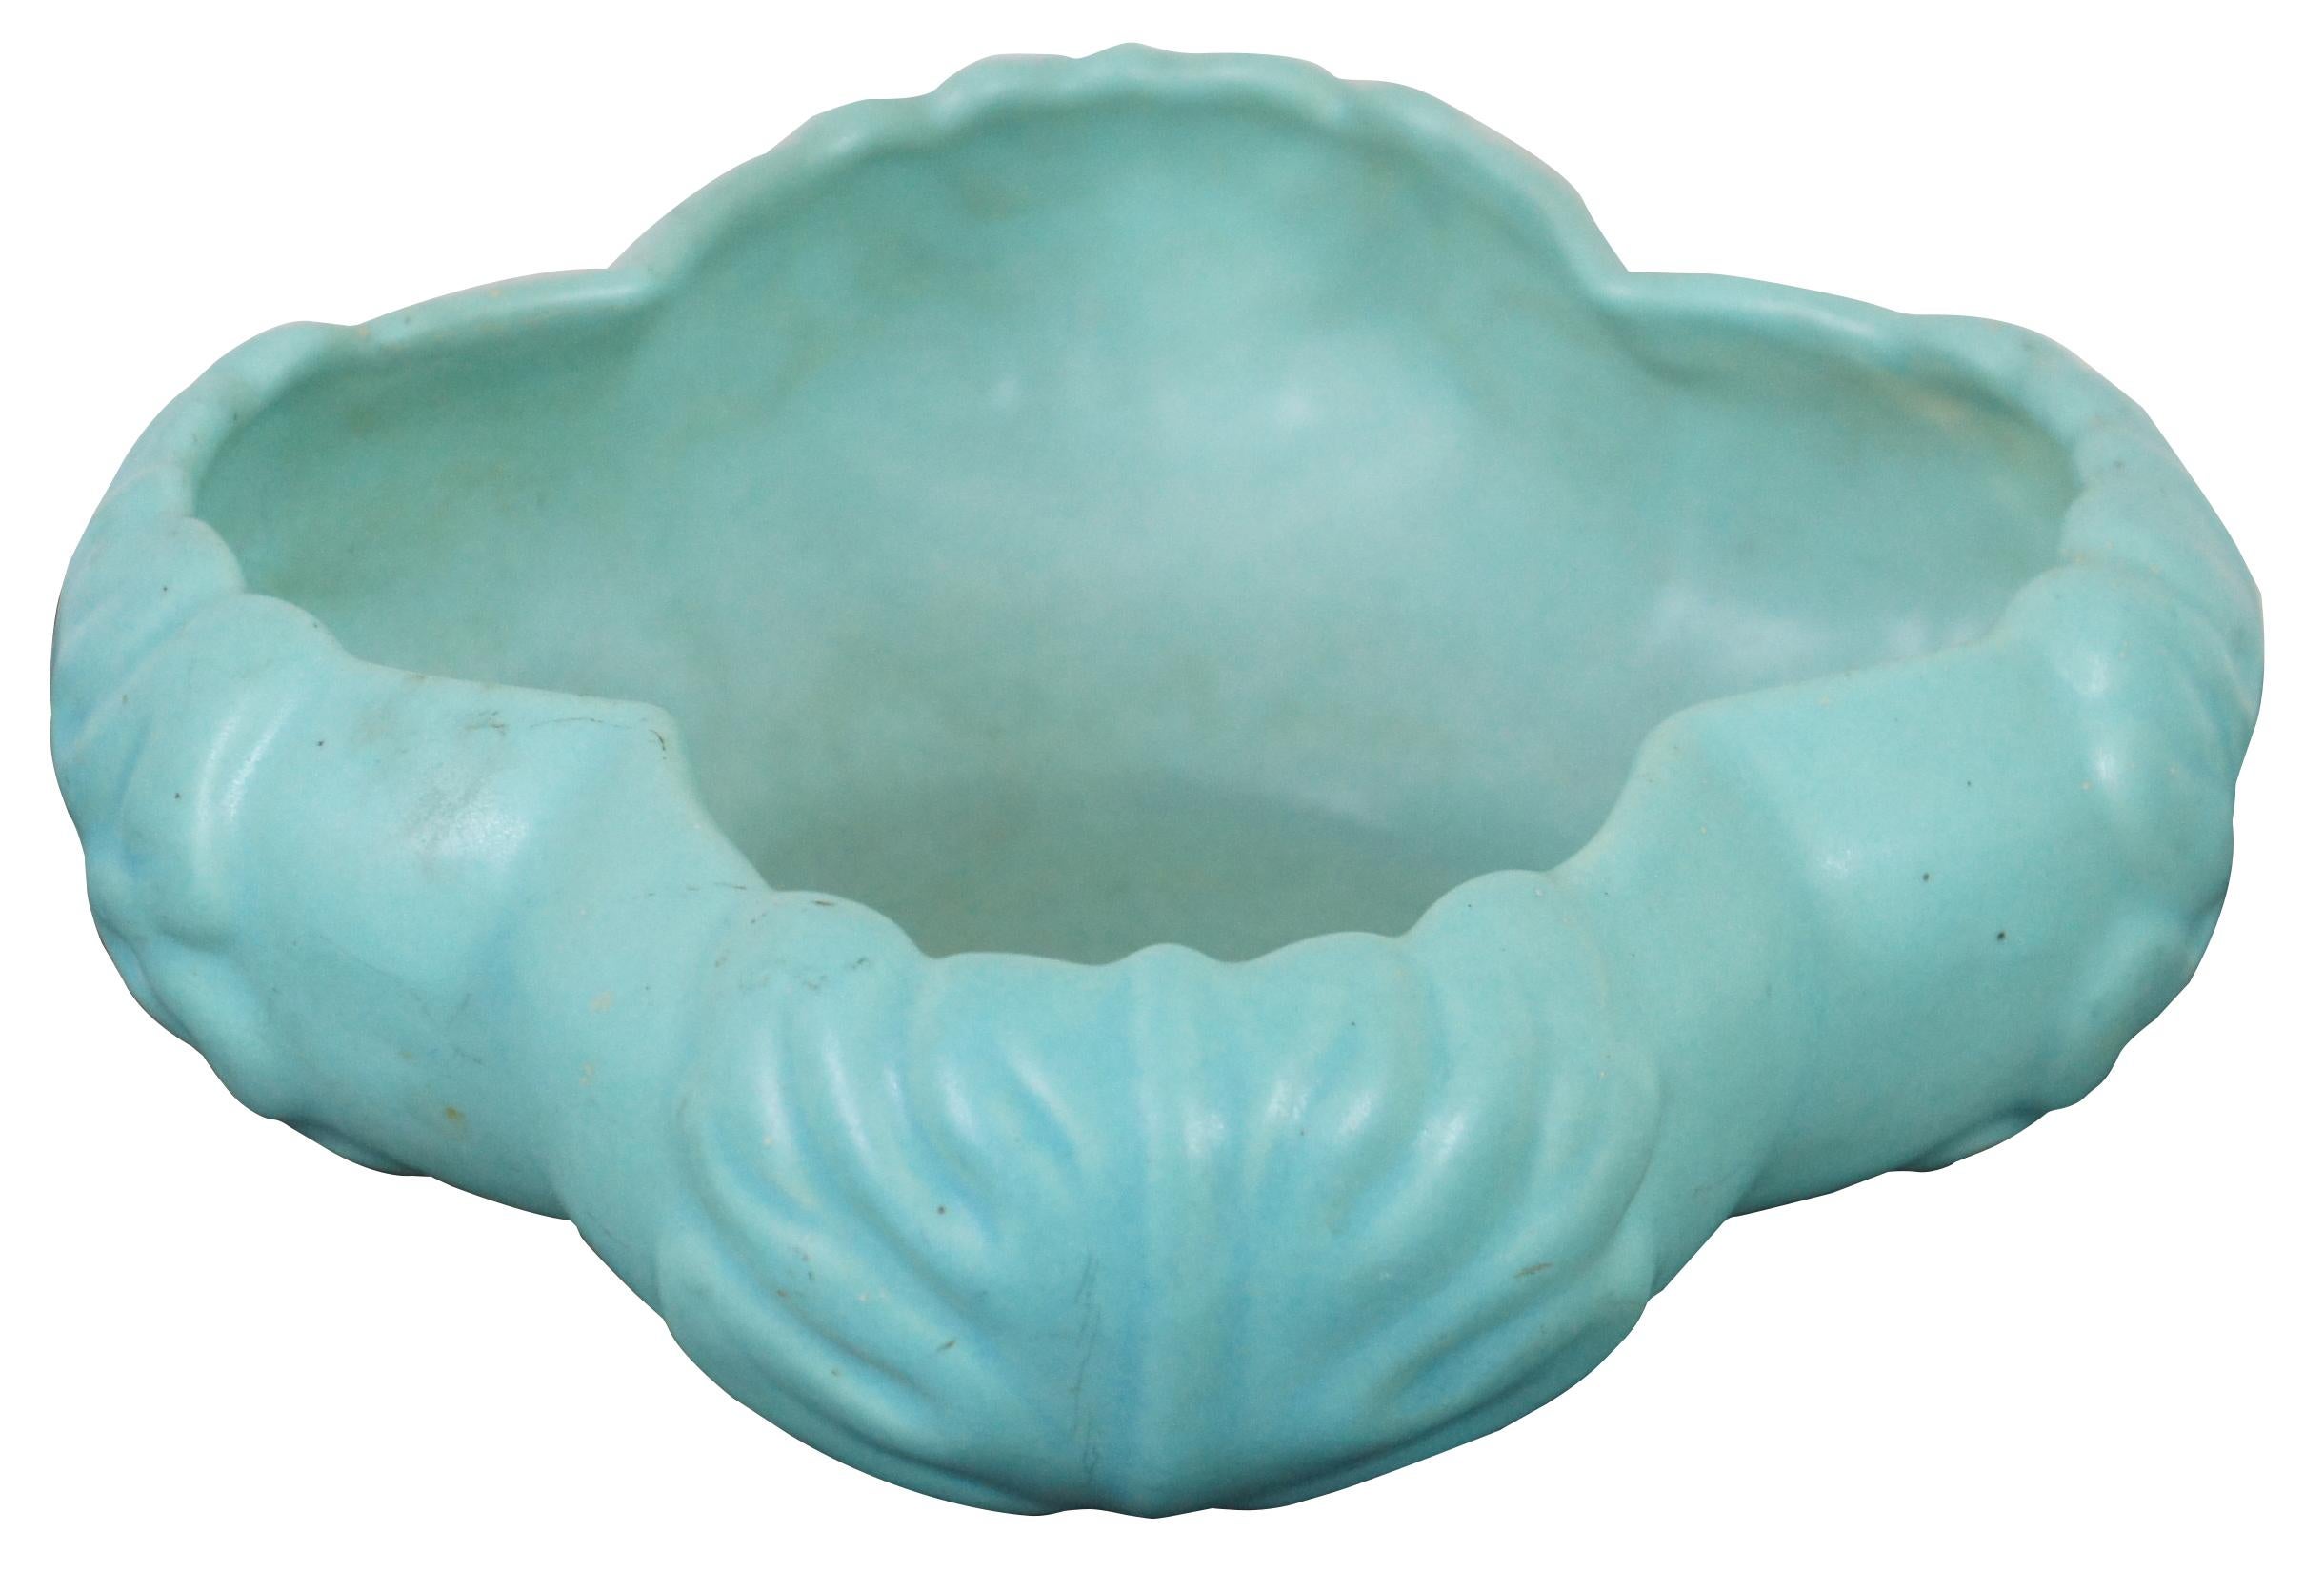 Vintage turquoise or robin’s egg blue clover shaped dish by Van Briggle Pottery of Colorado Springs.
   